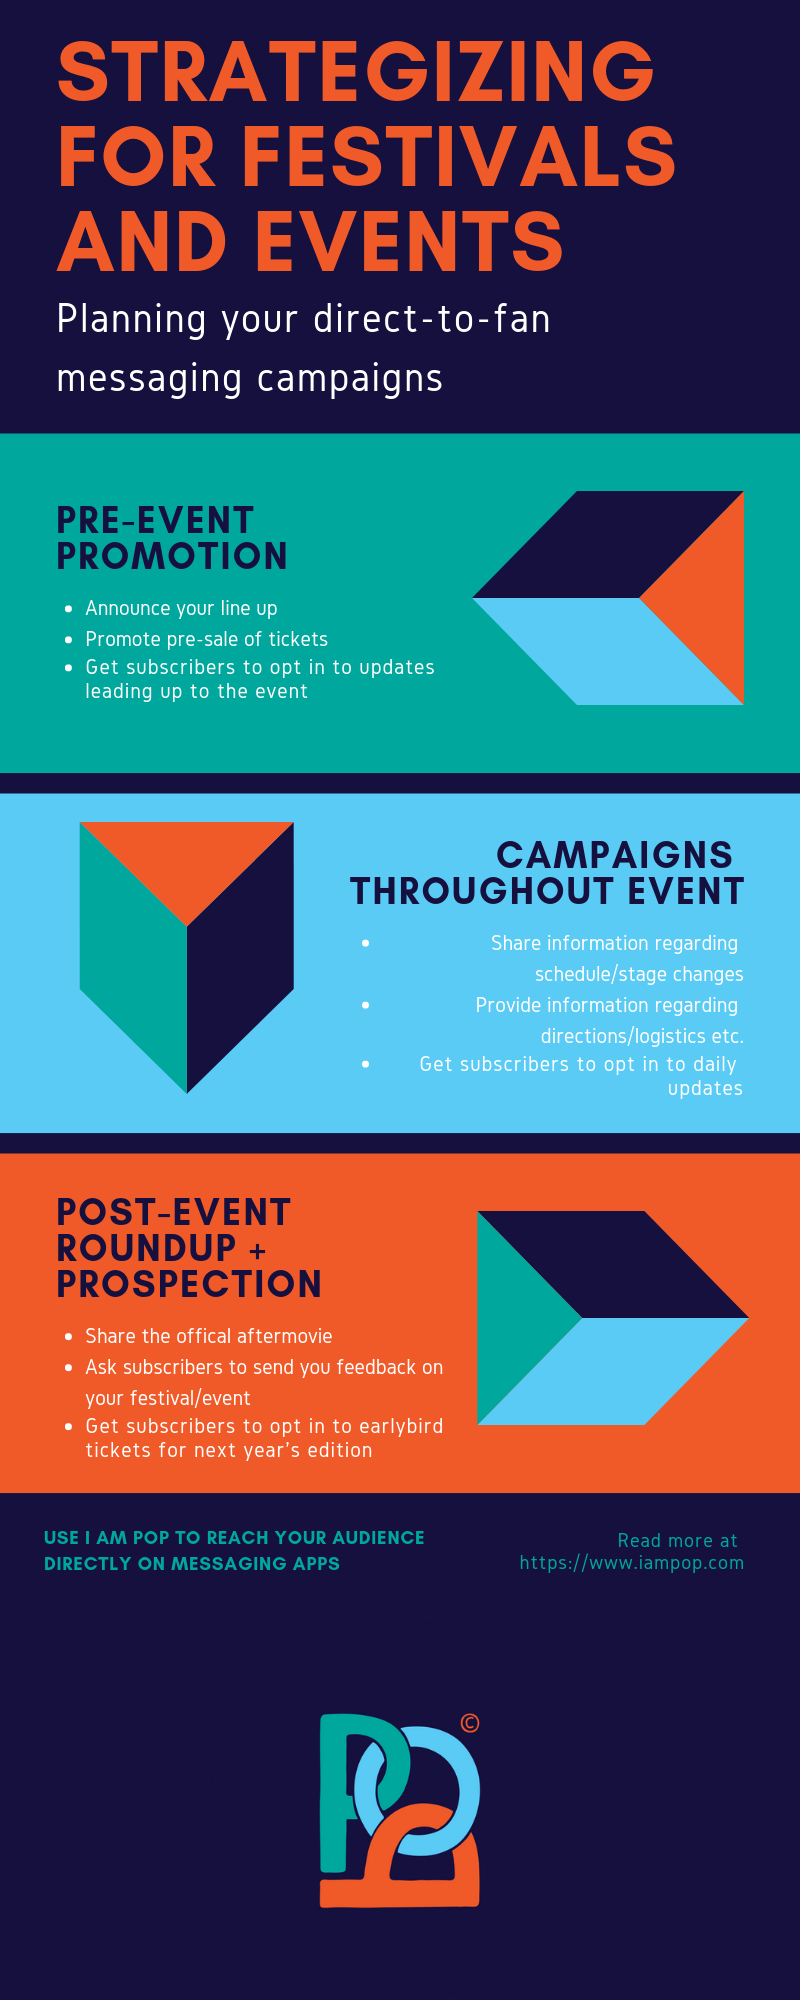 Strategizing-for-festivals-and-events-planning-your-direct-to-fan-messaging-campaigns